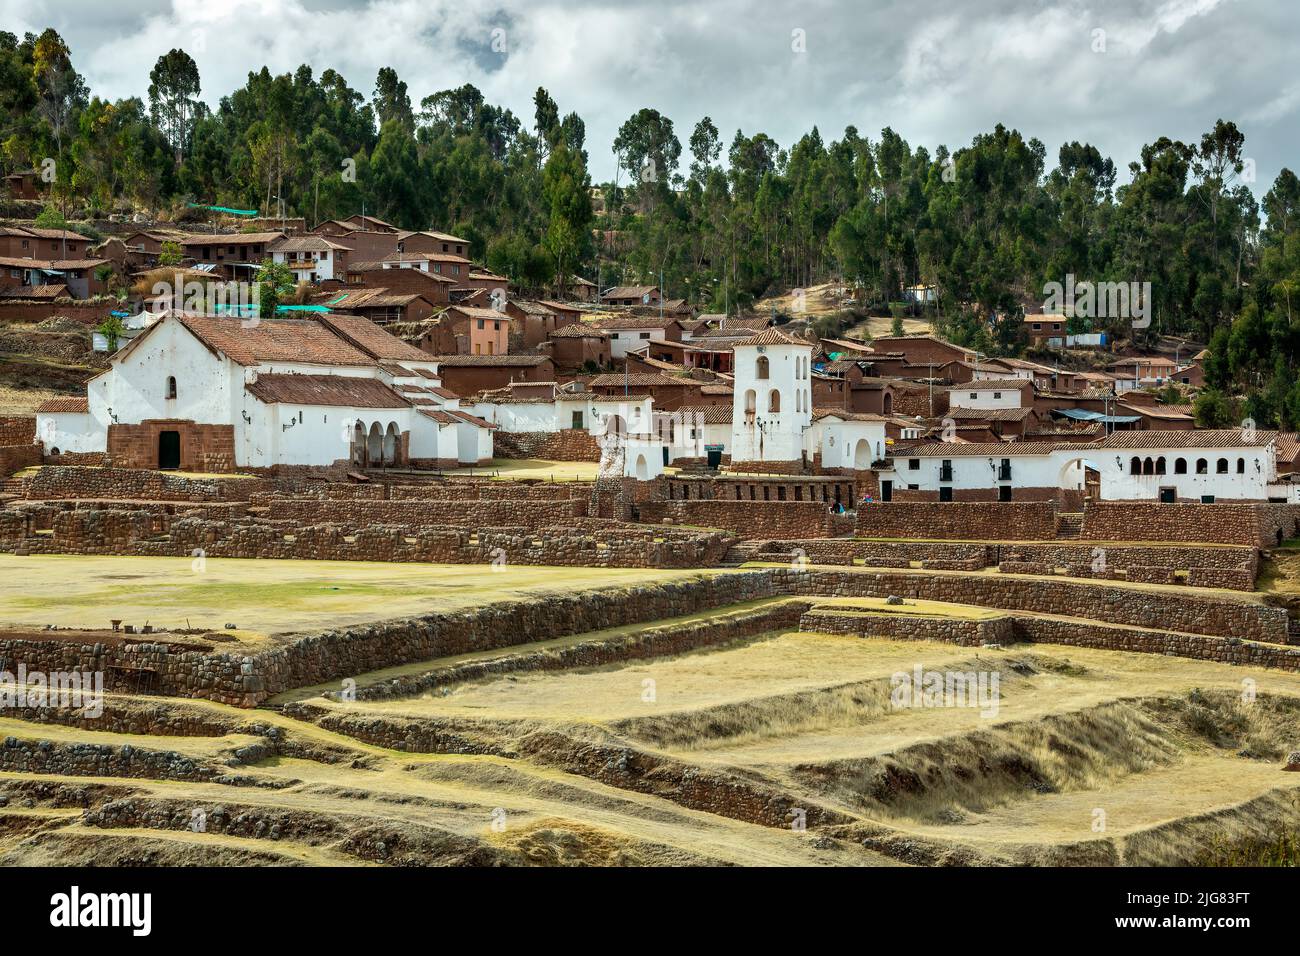 Village of Chinchero and agricultural terraces, Cusco, Peru Stock Photo